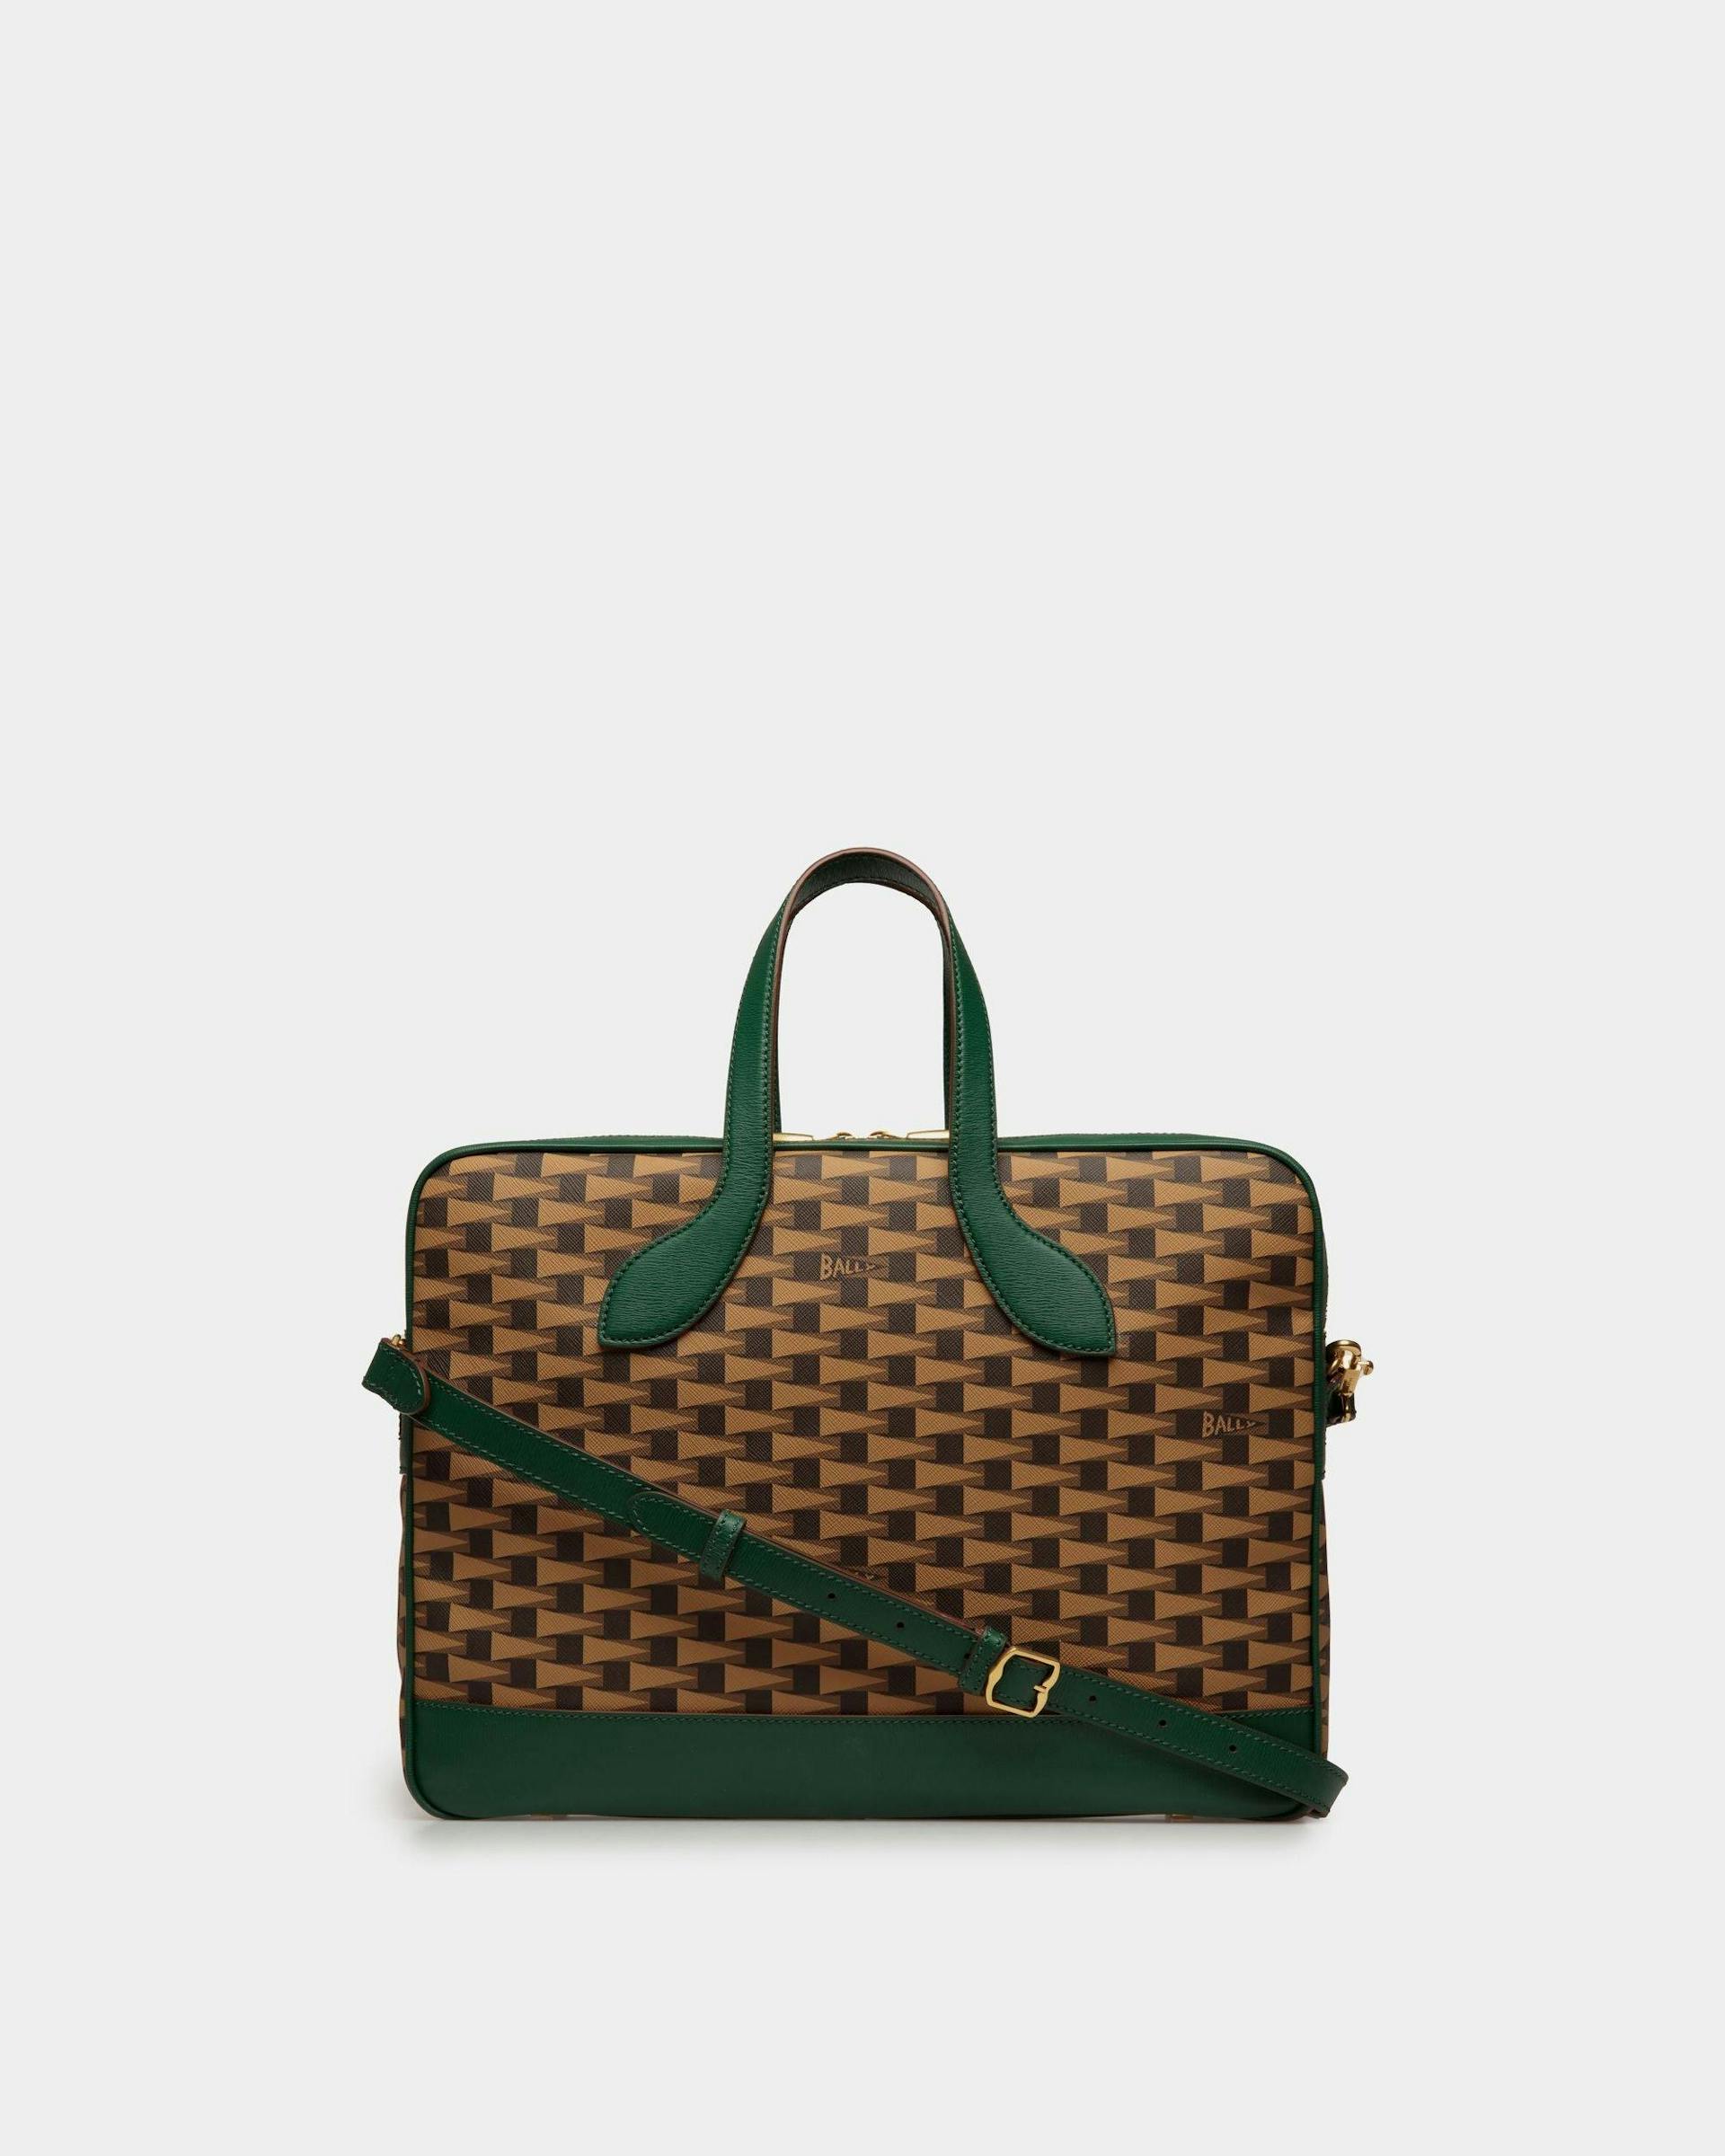 Men's Pennant Briefcase In Desert TPU And Kelly Green Leather | Bally | Still Life Back